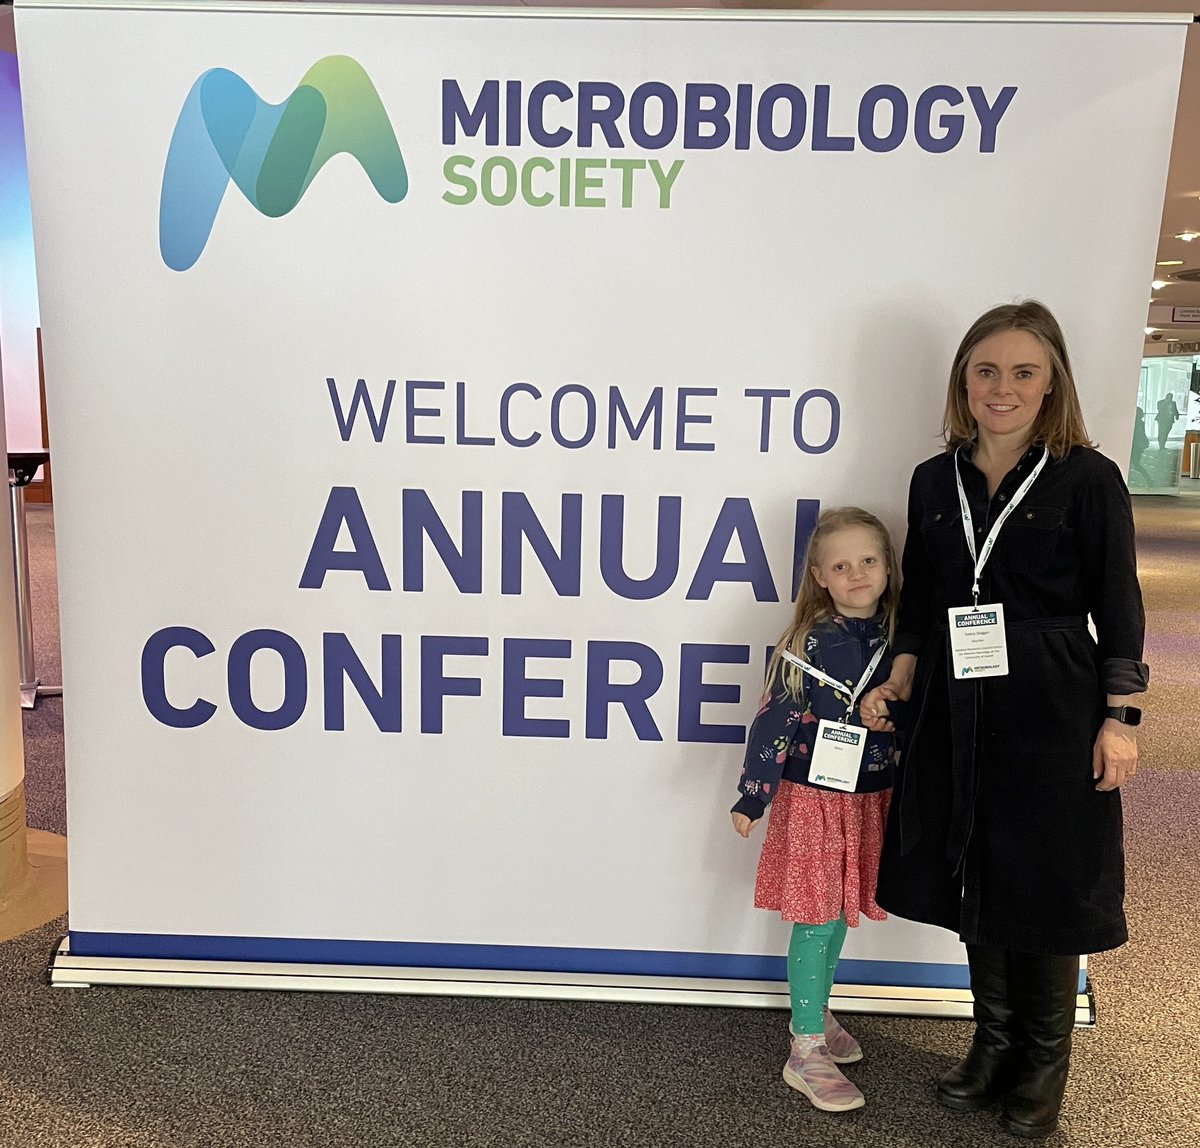 I’m doing annual conference #MicroSoc24 a little differently this year, and am very grateful to @MicrobioSoc for their on site childcare. Find me to chat about fungal-bacterial co-infections, #AccessMicro or even bringing kids to conferences.